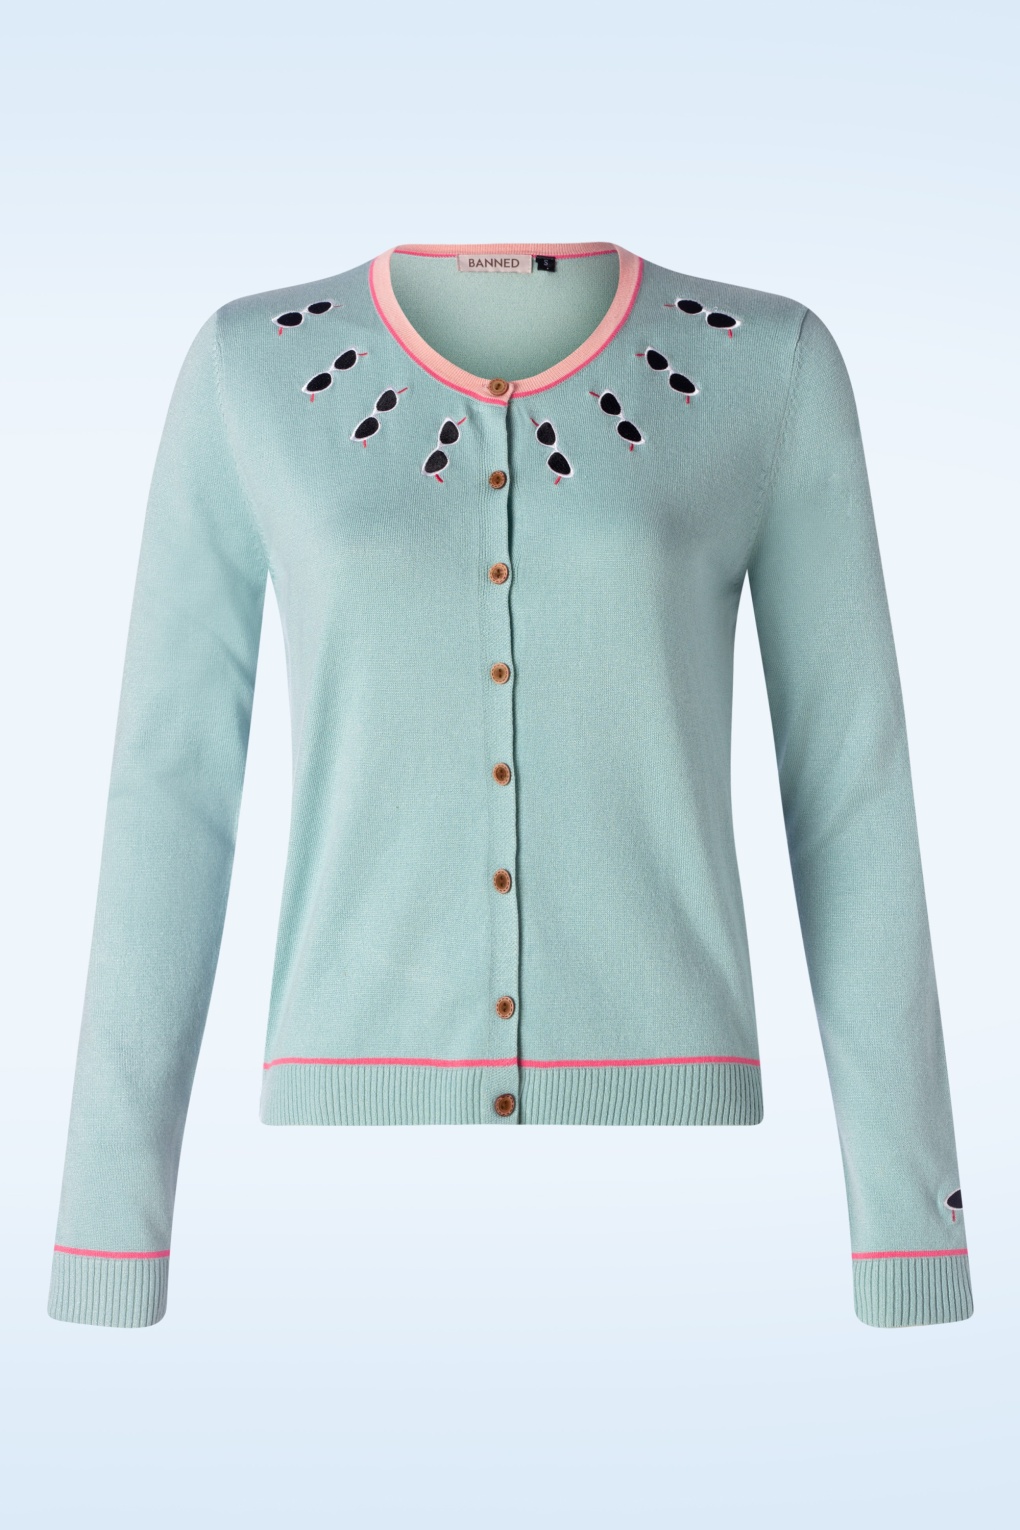 Banned Retro Summer Shade Chic Cardigan in Mint | Shop at 